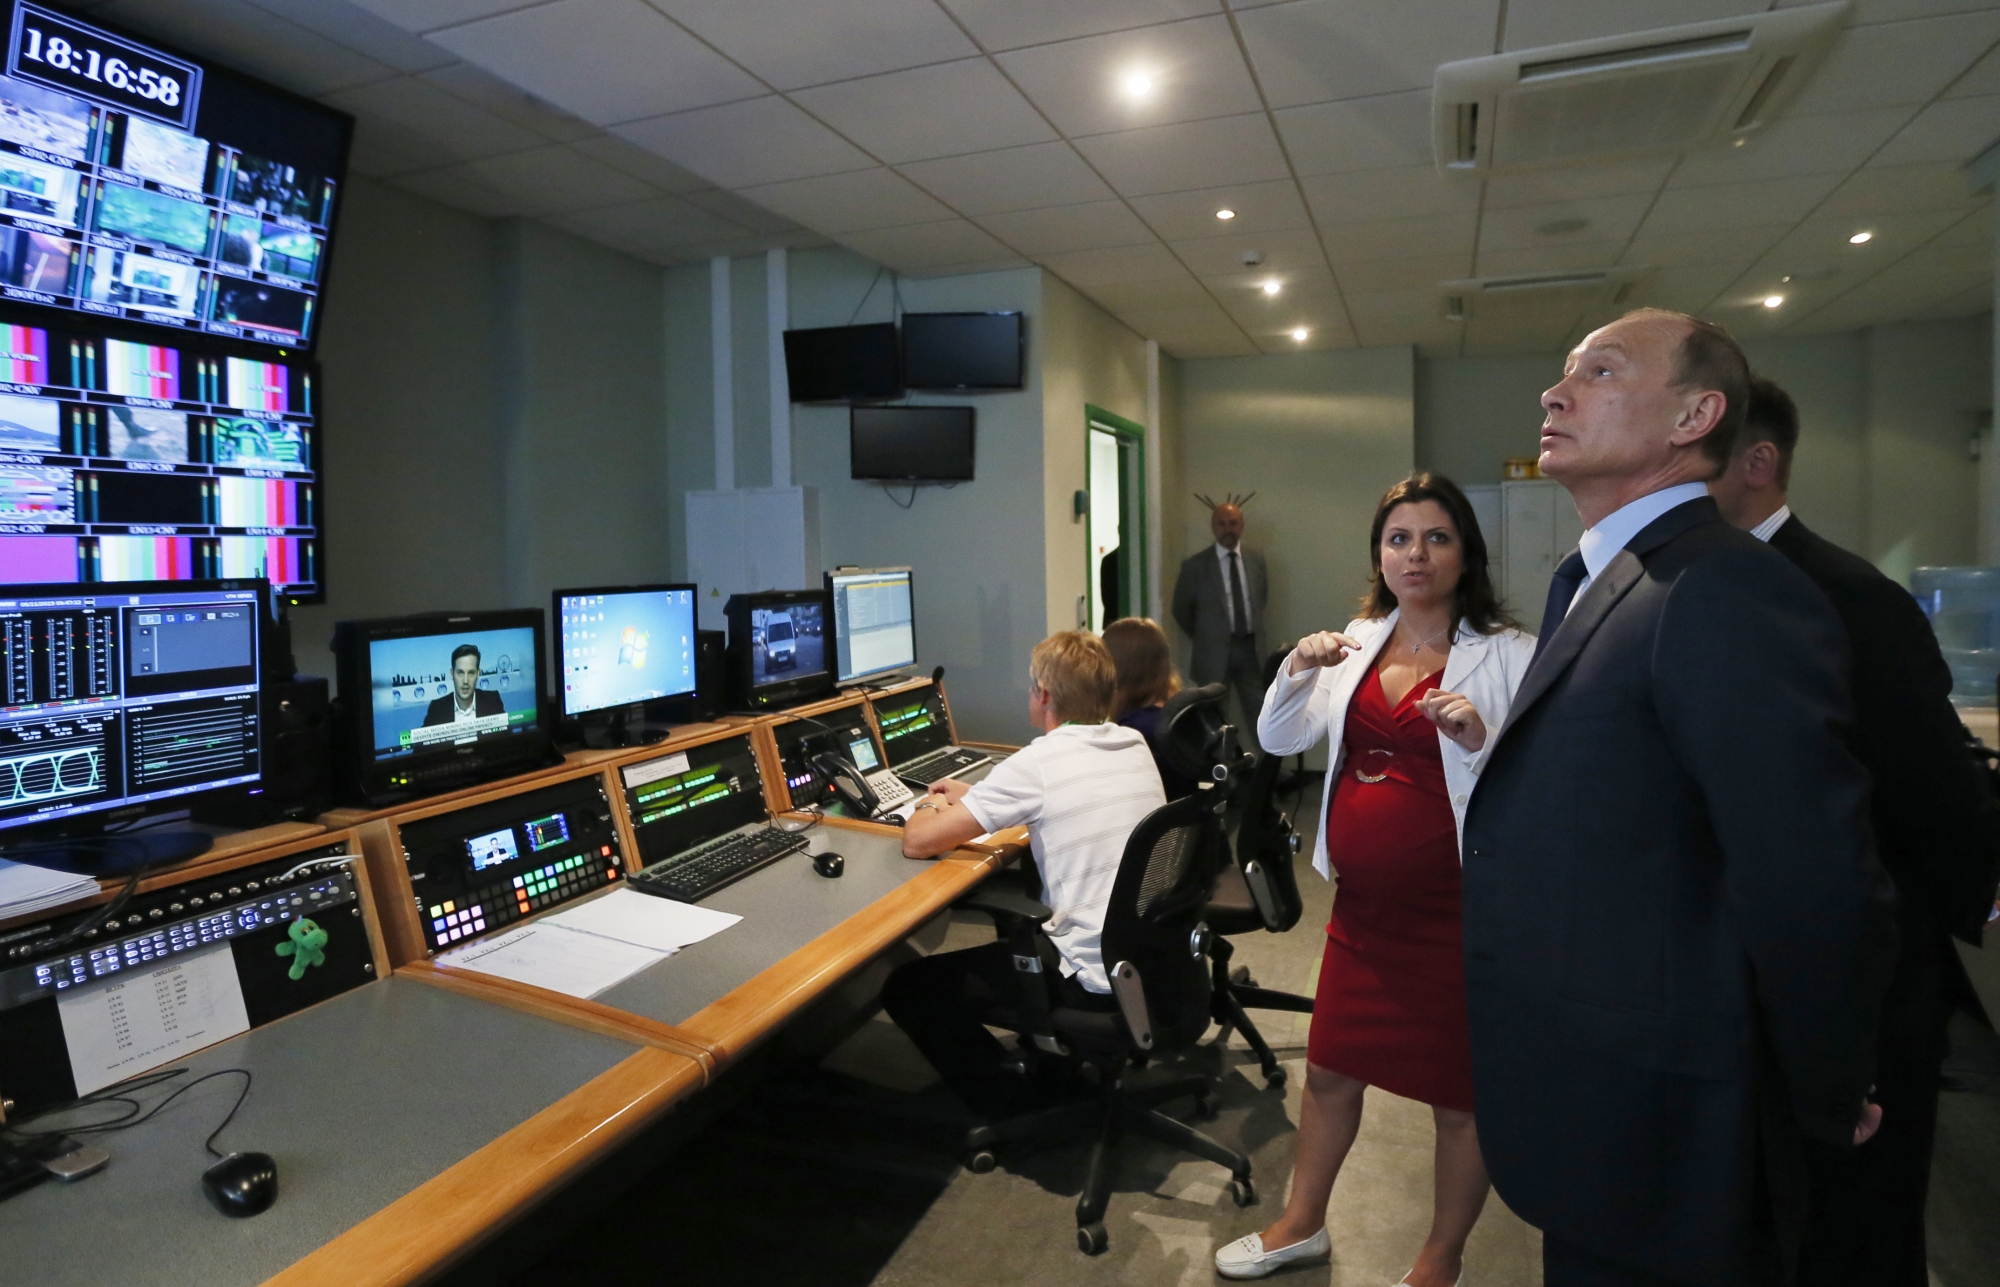 epa03740320 Russian President Vladimir Putin (R) looks at technical installations as he visits the new studio complex of television channel 'Russia Today' in Moscow, Russia, 11 June 2013.  EPA/YURI KOCHETKOV / POOL